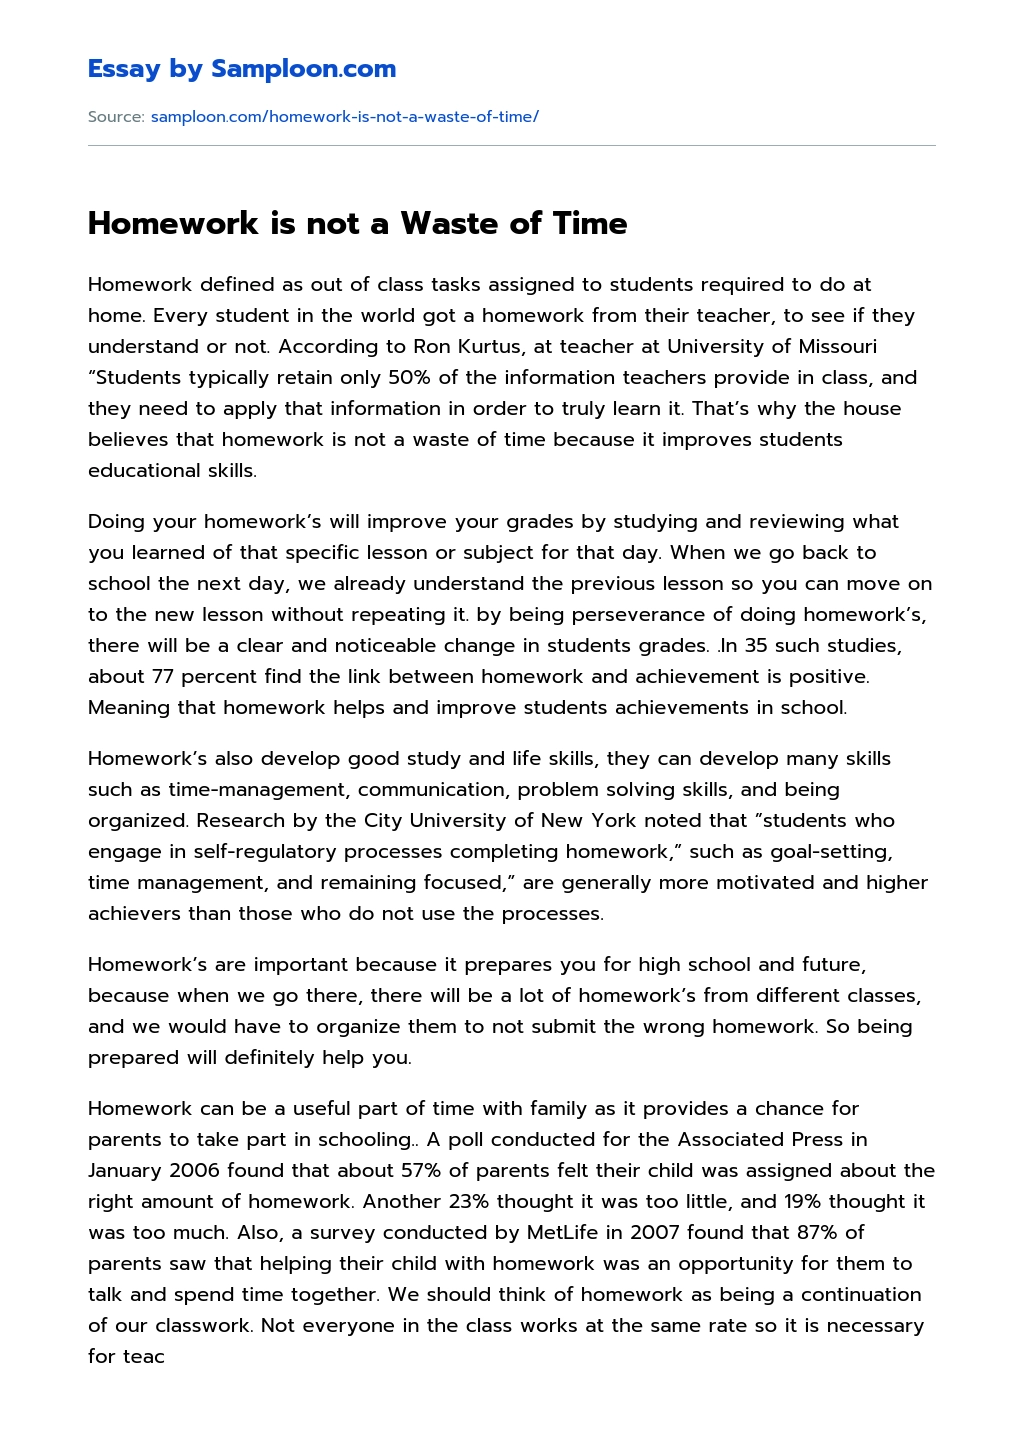 time waste is life waste essay